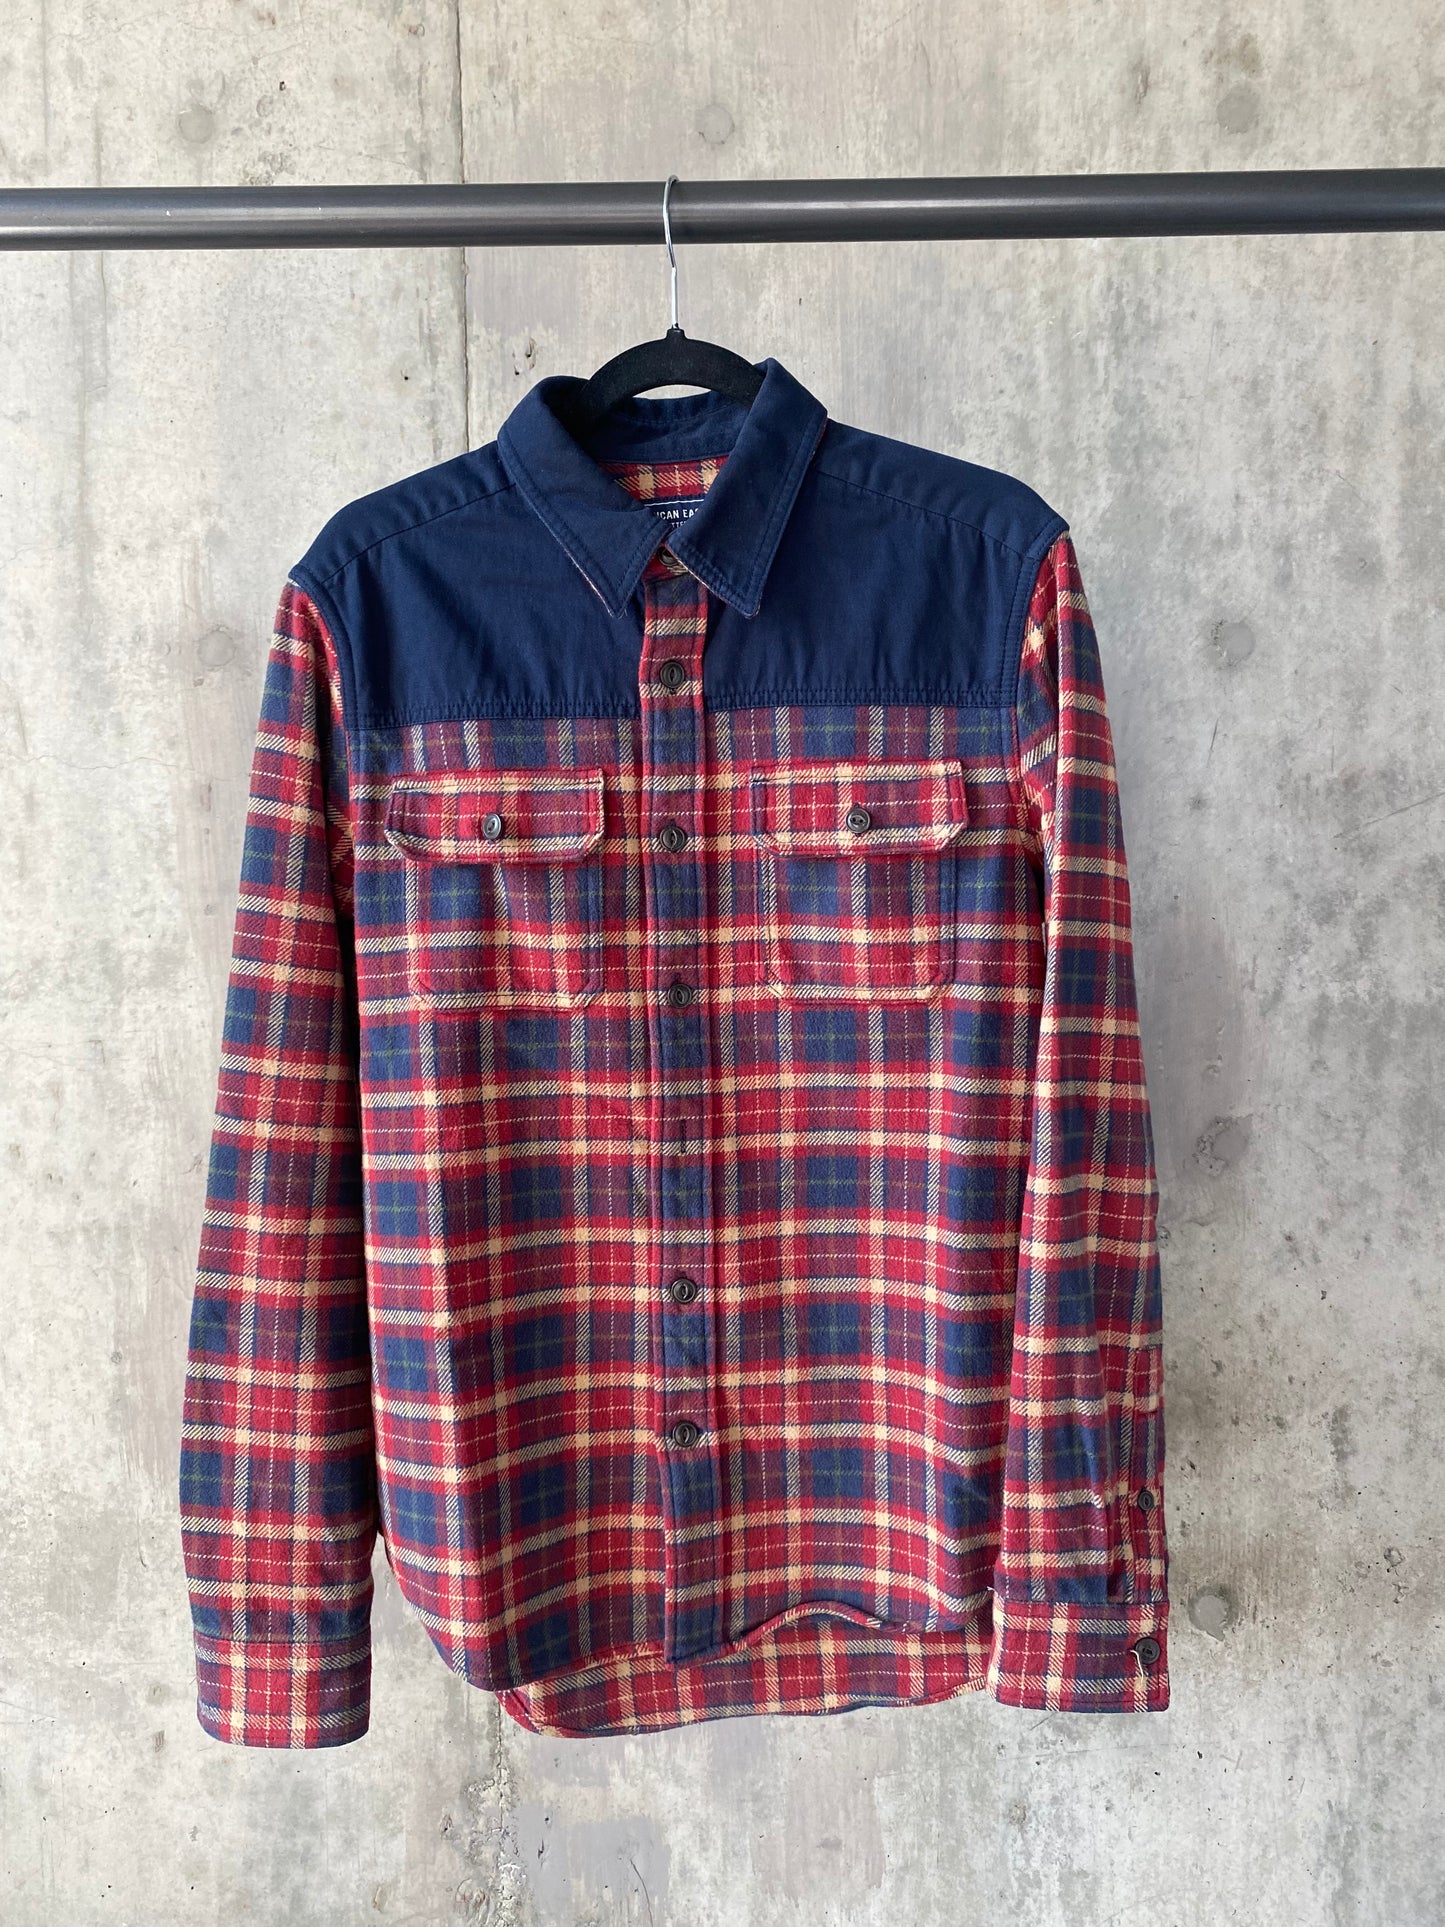 Thrifted American Apparel Flannel